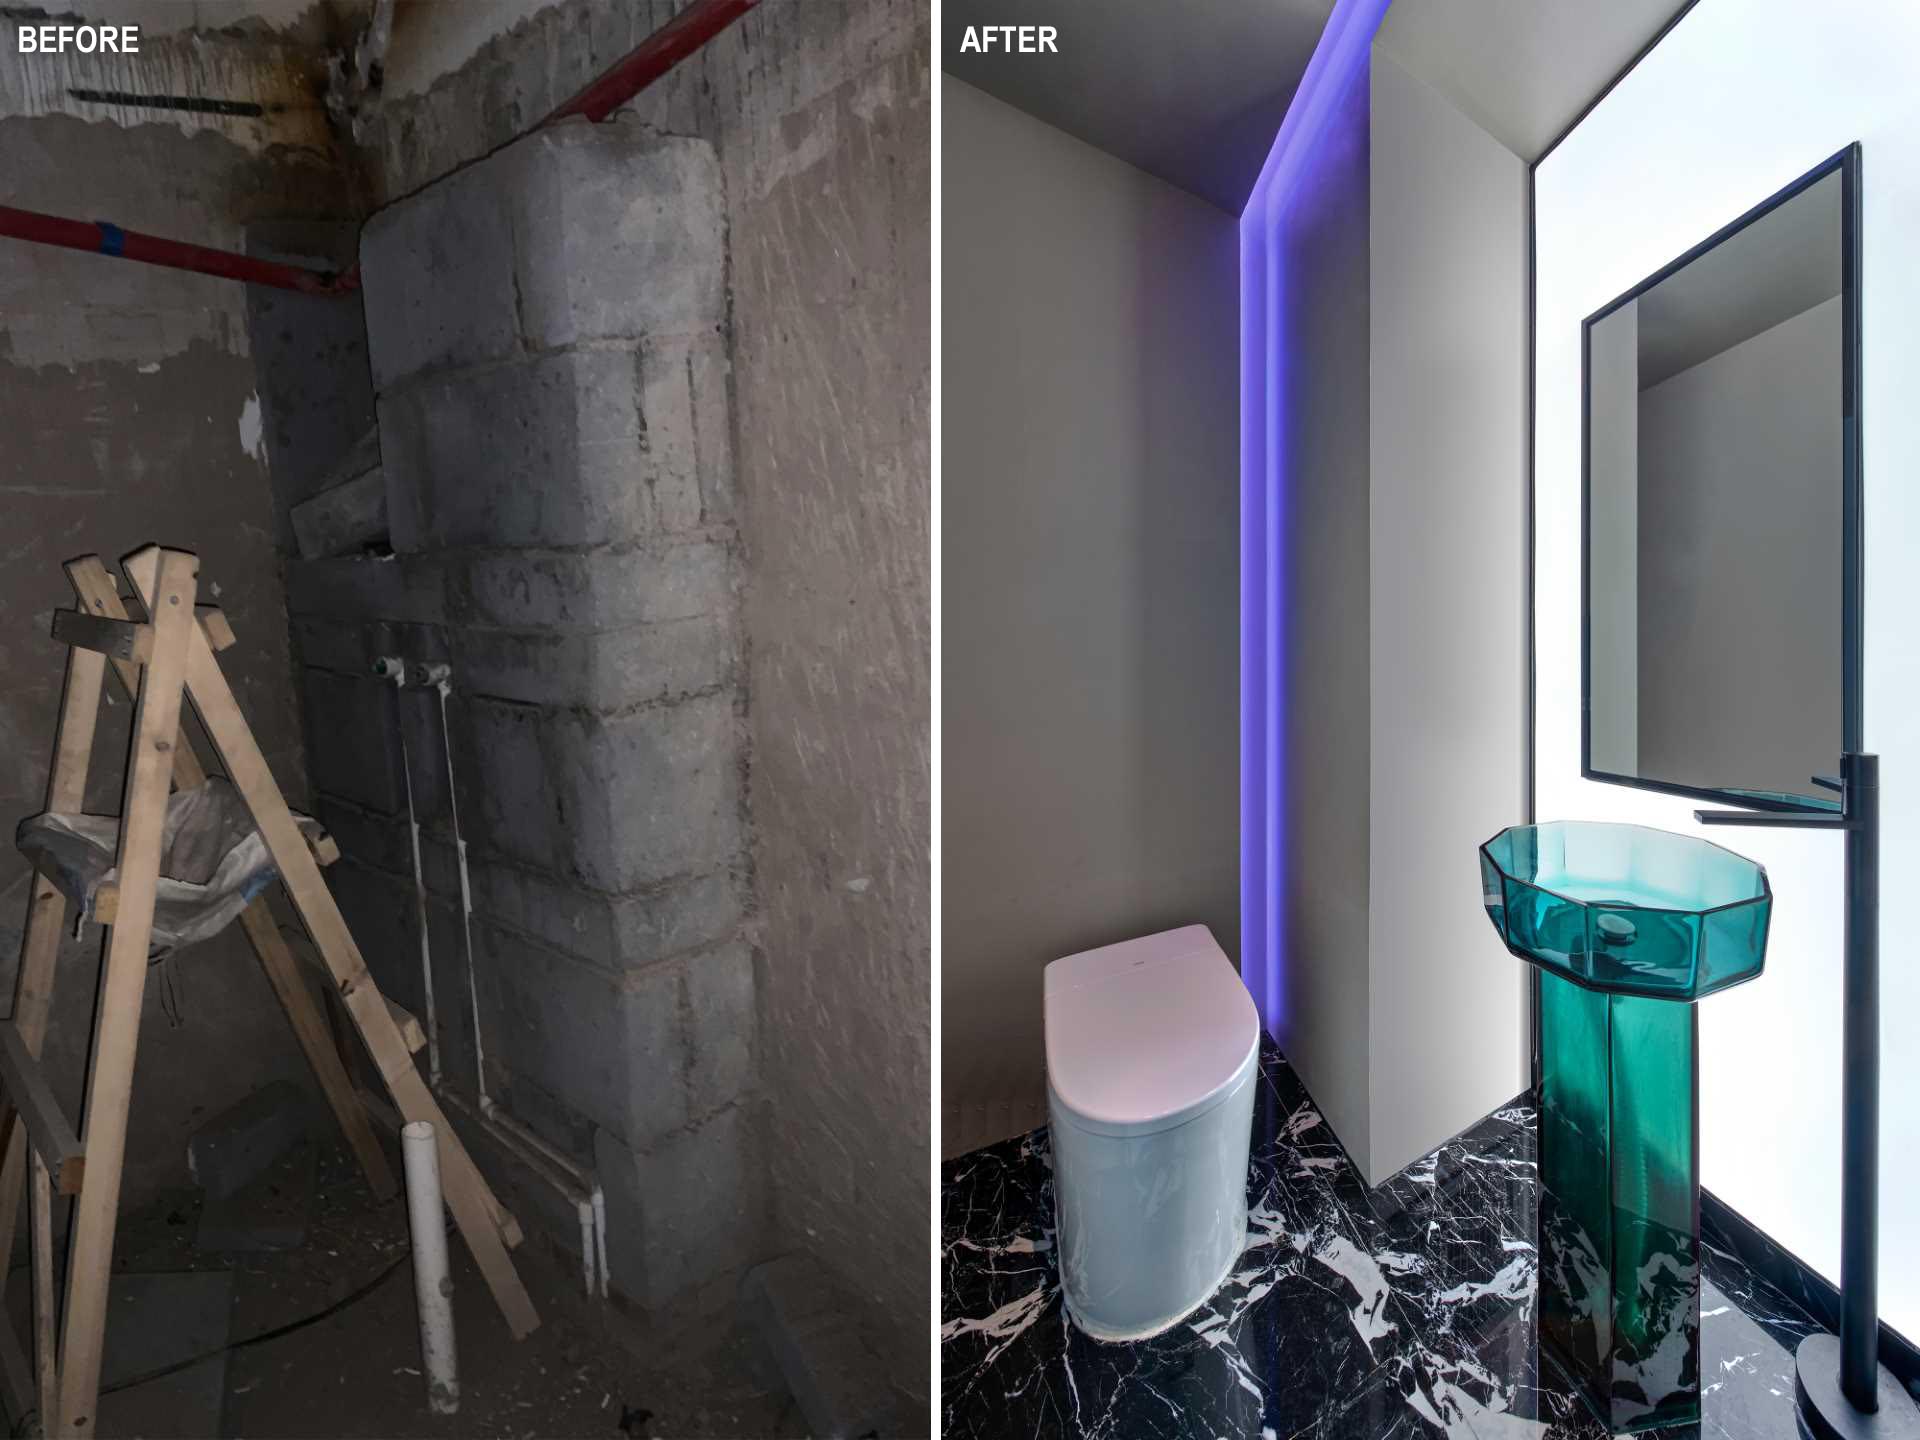 In the bathroom, there's purple LED lighting that lines the wall and a green glass pedestal basin.